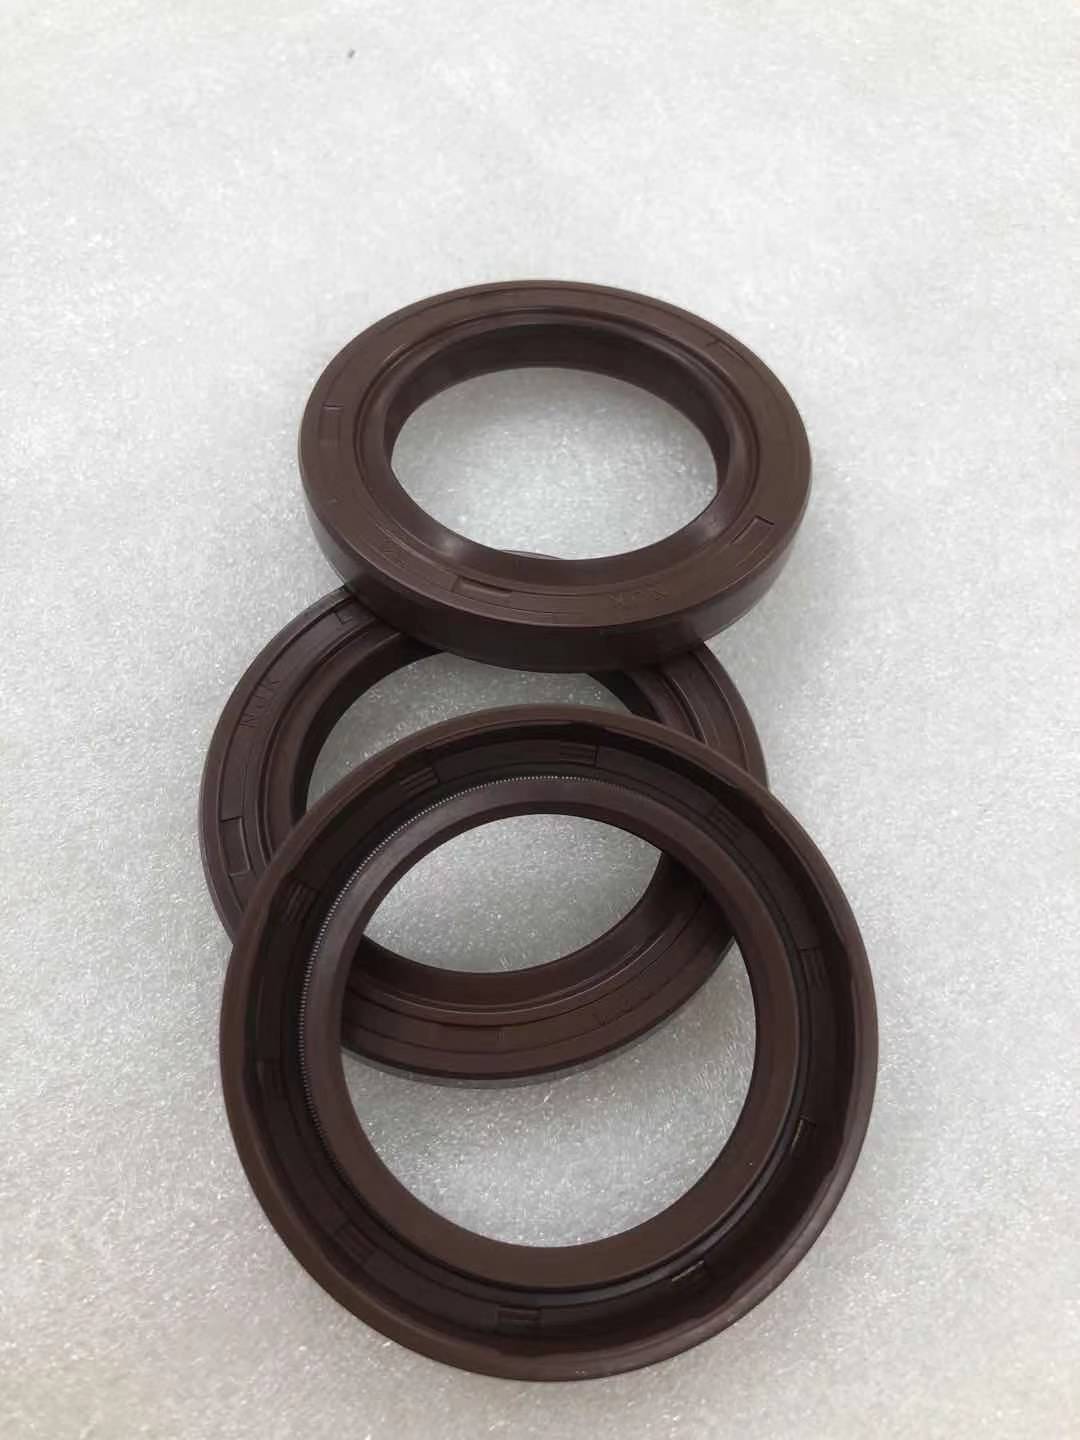 DAYANG Hot Sale Motorcycle Parts LIFAN High Performance CB125 engine oil seal Box Packing Plastic Material Origin Type Quality